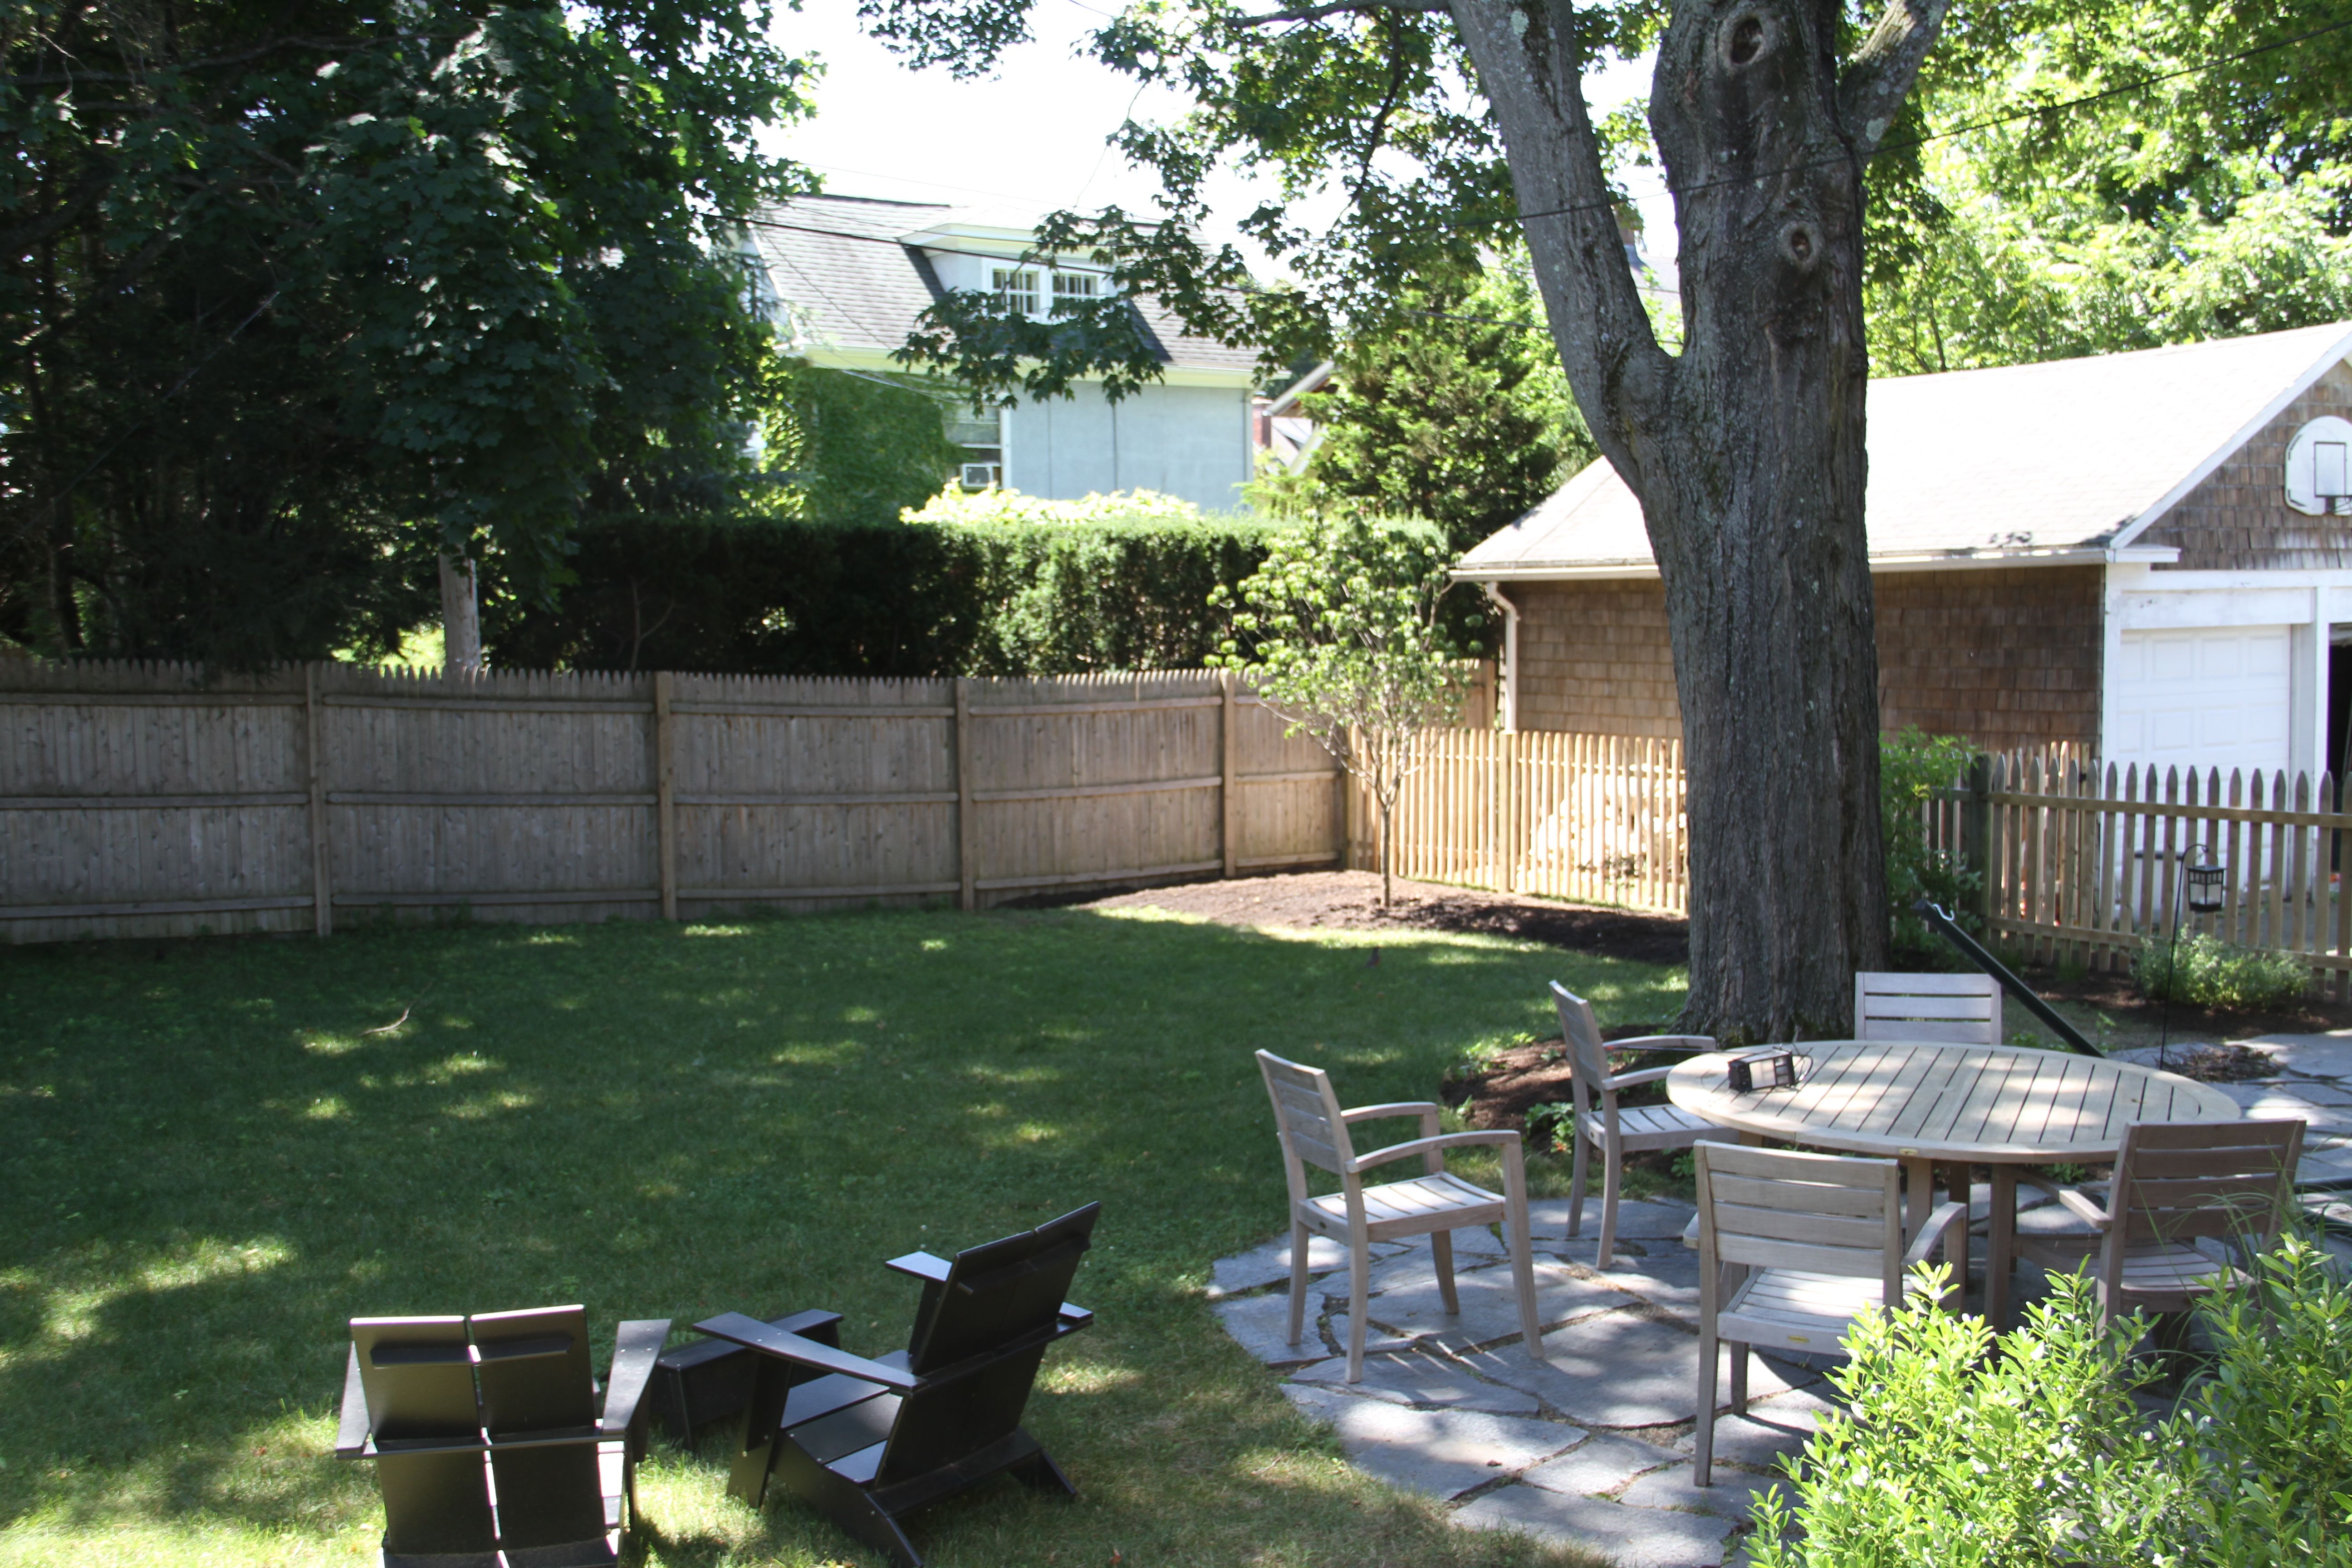 The finished yard, looking toward Bec's tree.